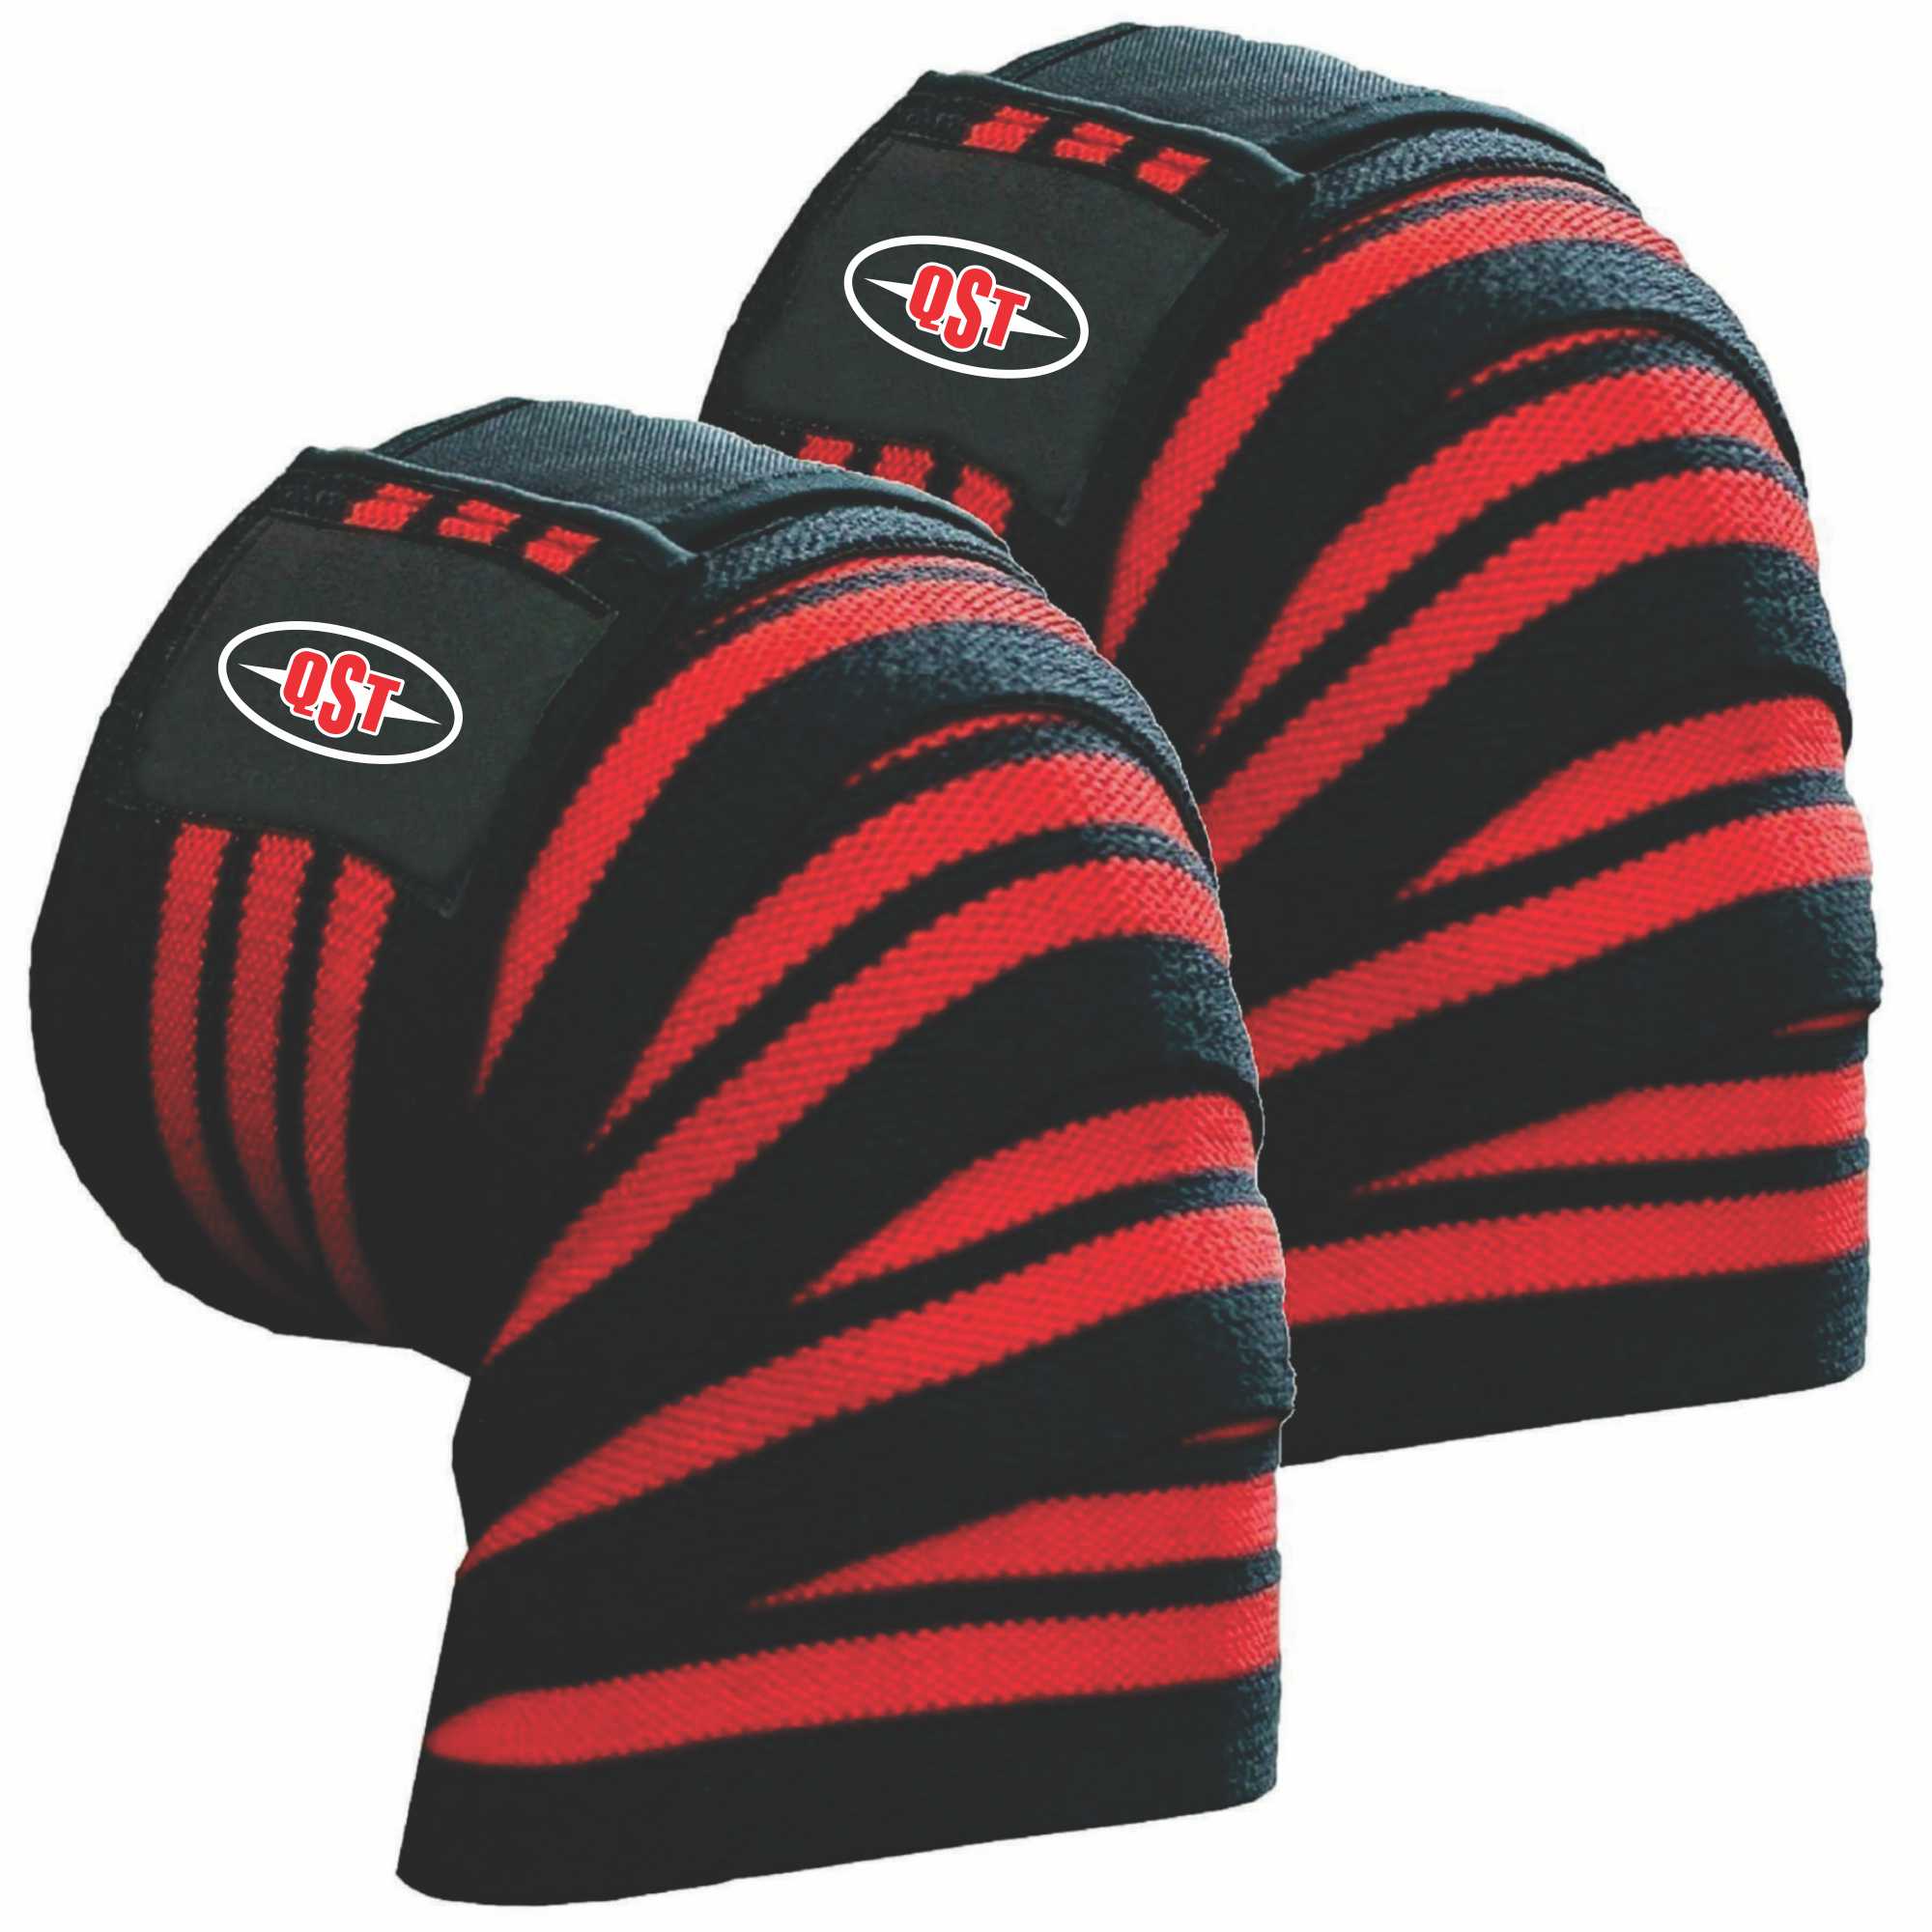 Weightlifting Knee Wraps - ACS-1517